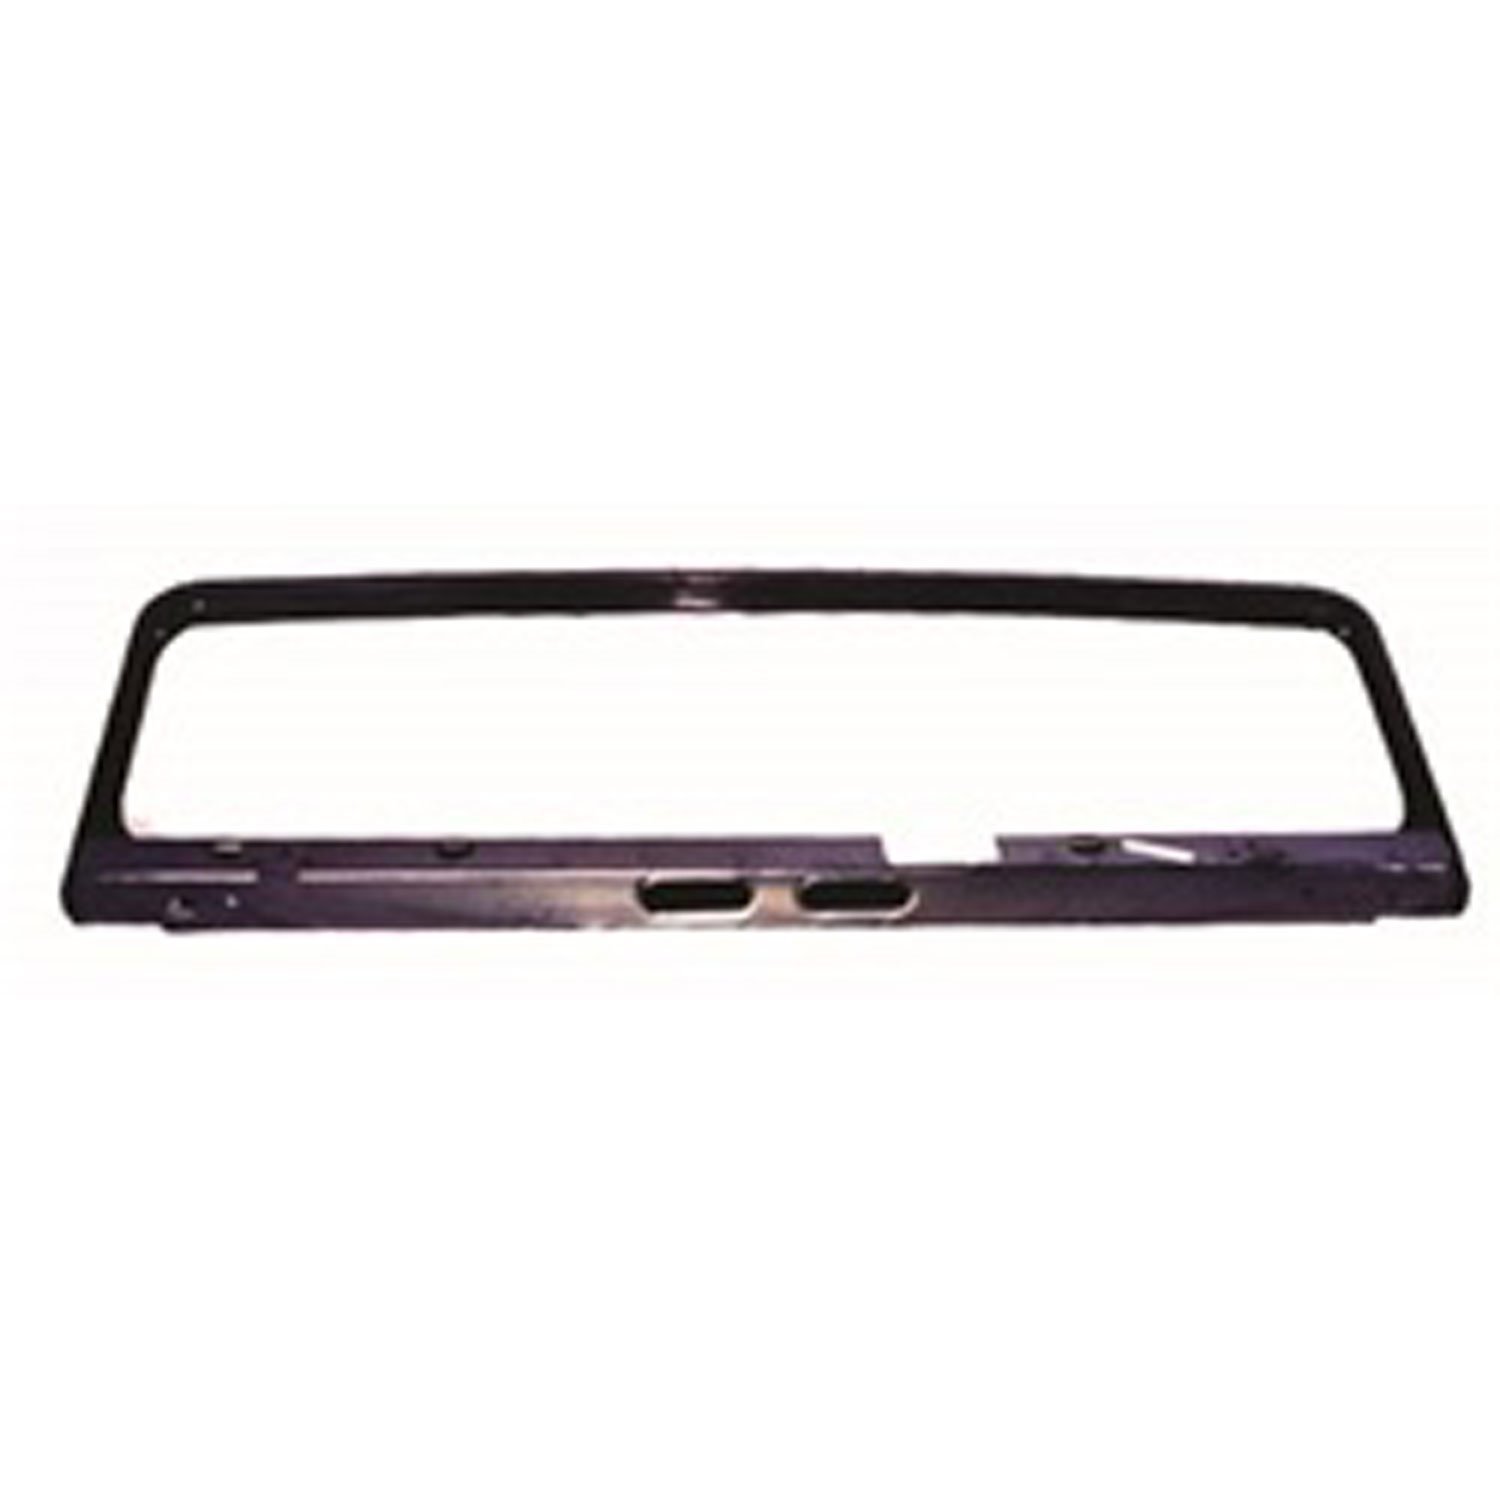 Replacement windshield frame from Omix-ADA, Fits 67-75 Jeep CJ5 and 67-71 CJ6 with bottom-mounted wipers.